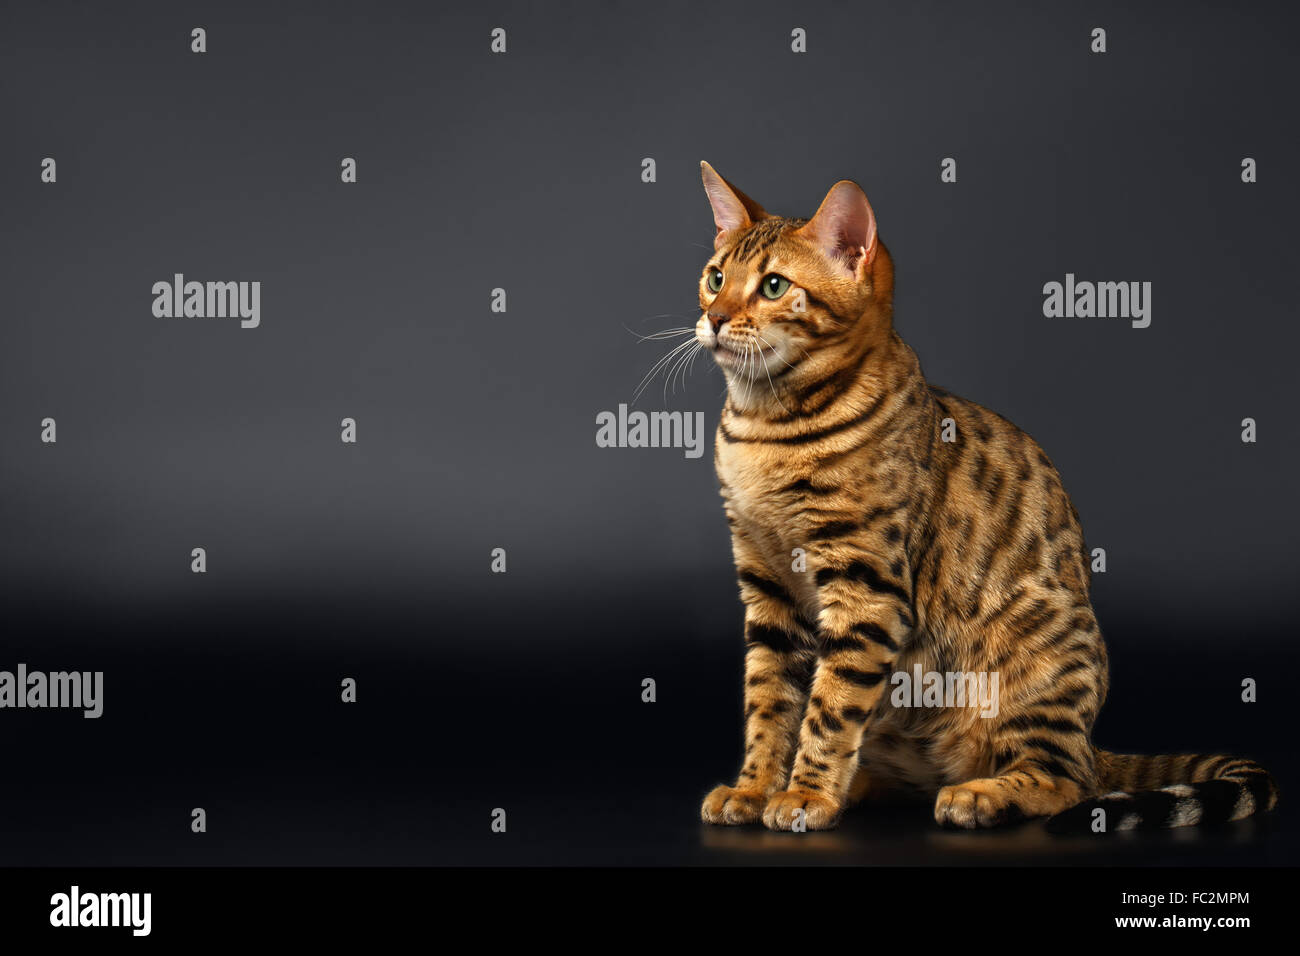 Bengal Cat Sits on Black background Stock Photo